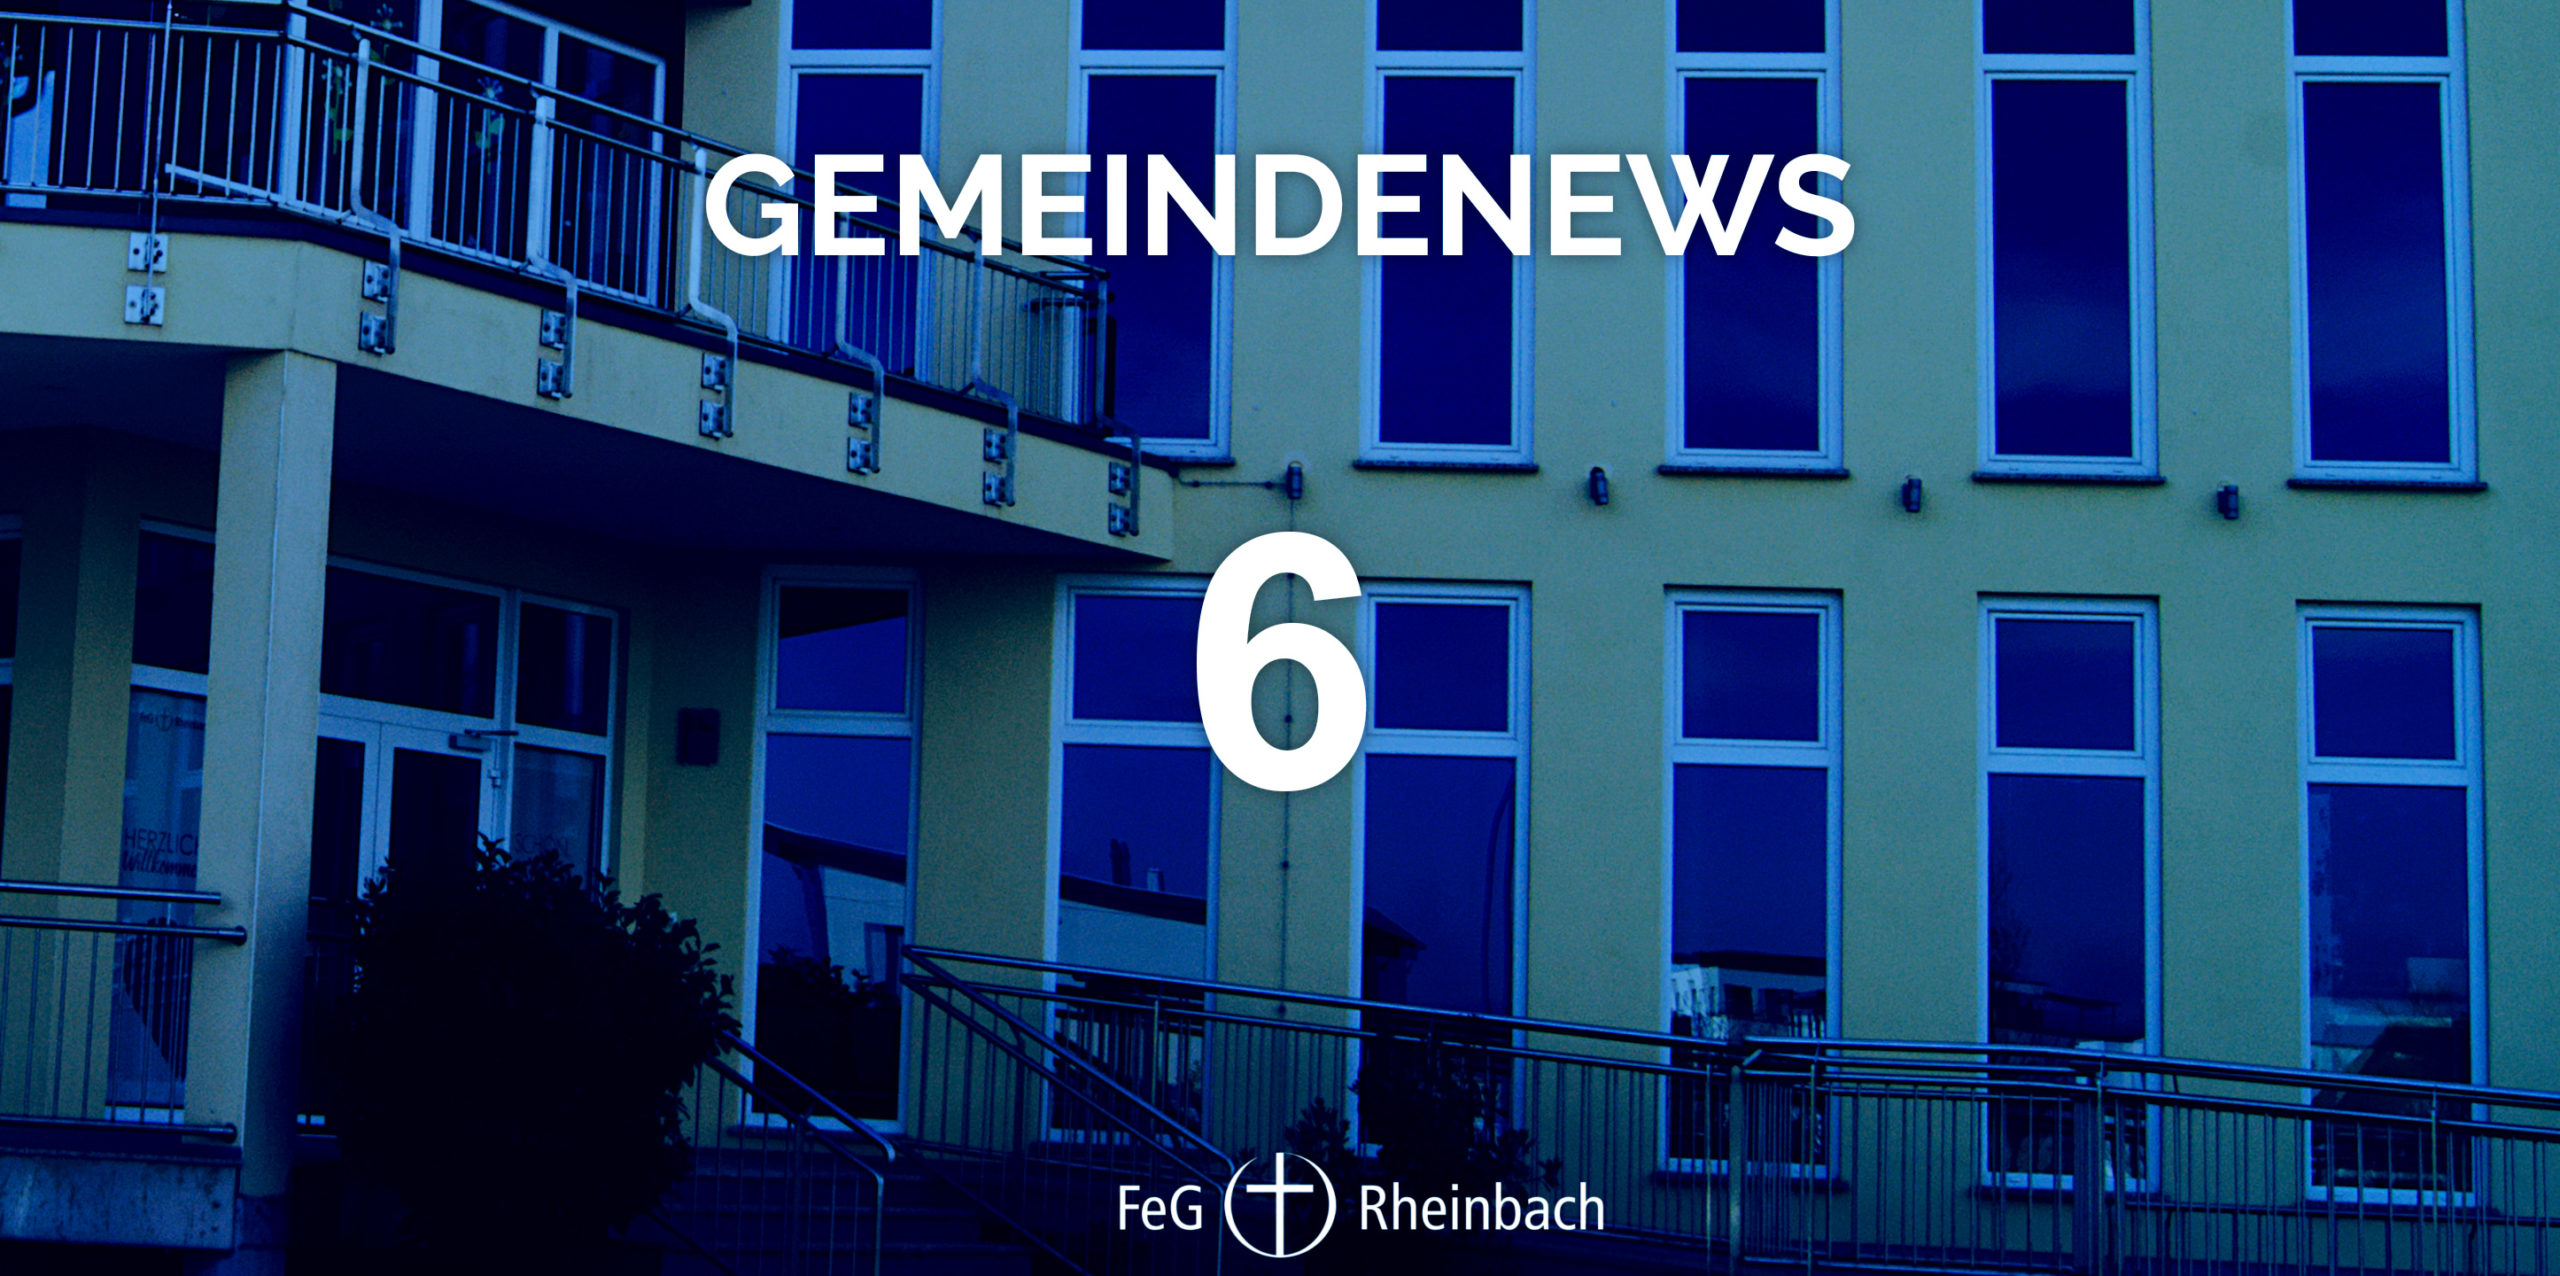 You are currently viewing Gemeindenews 6